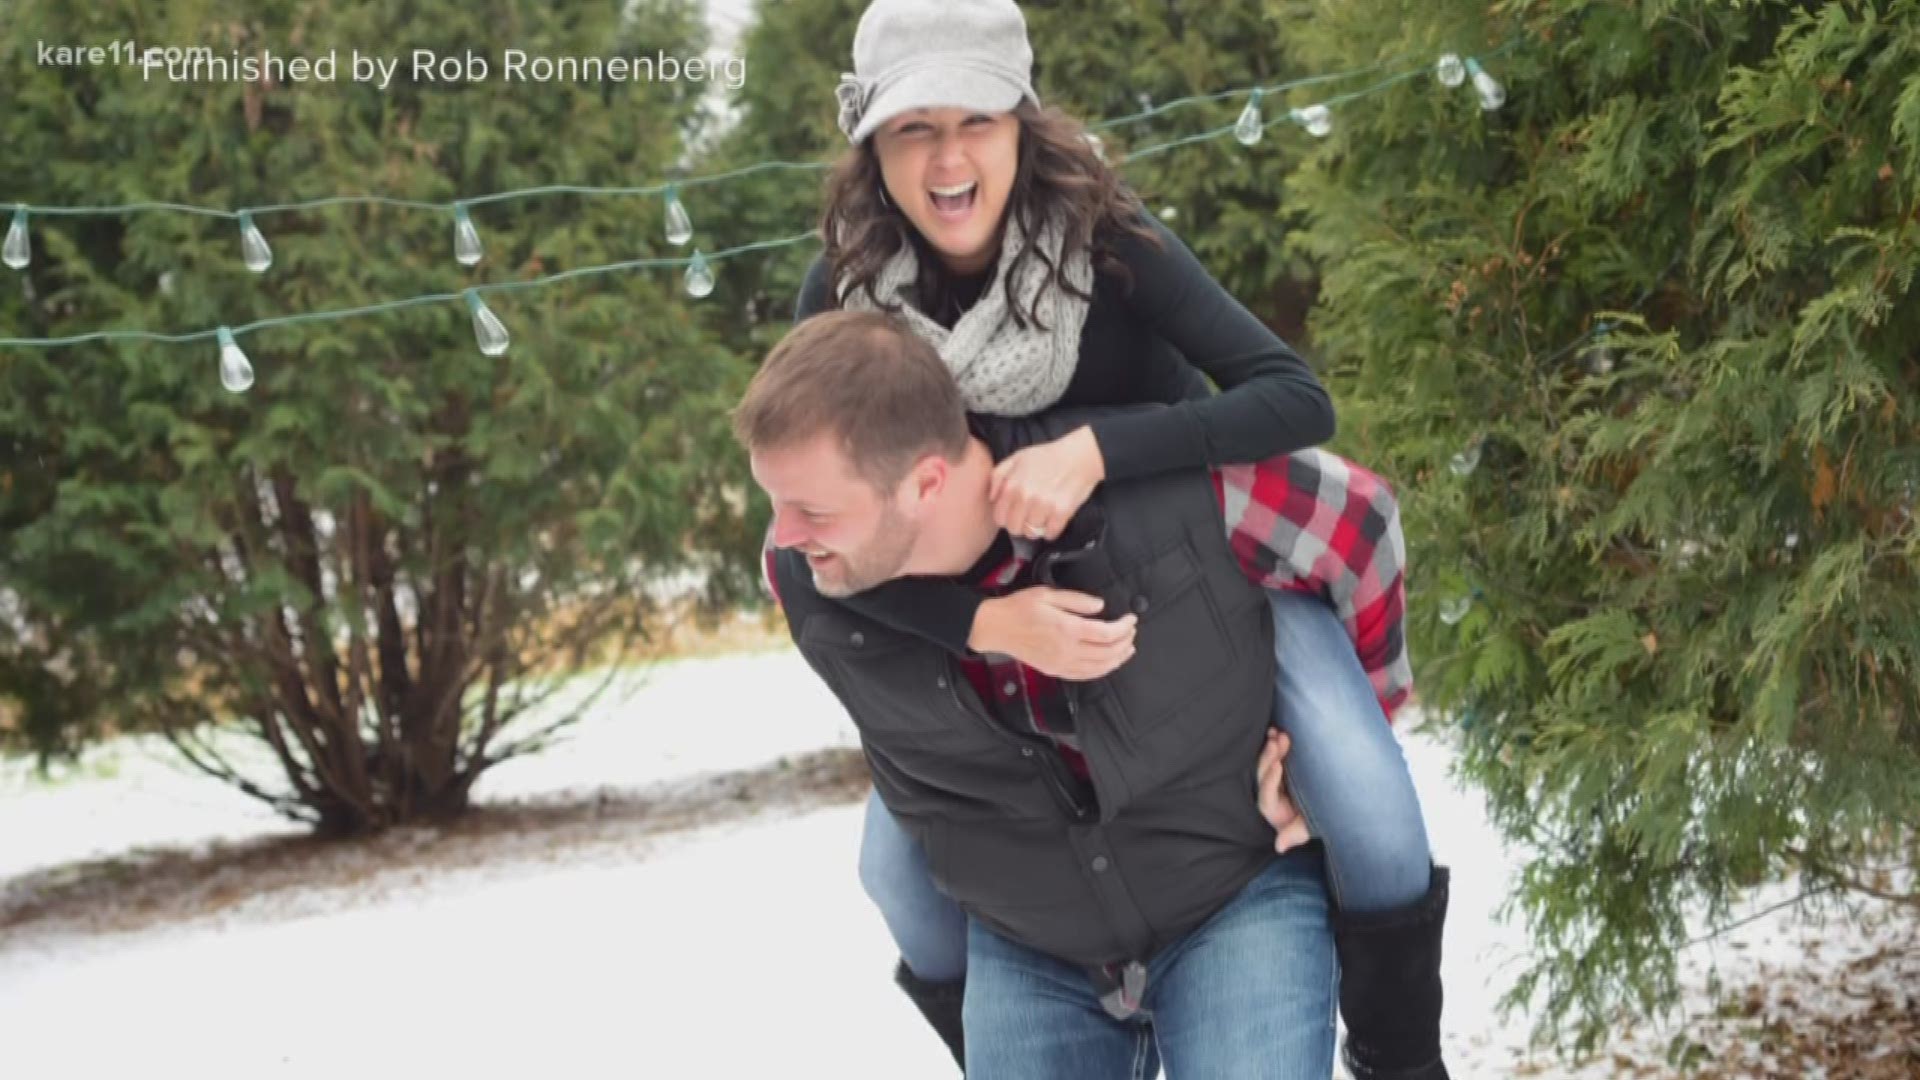 Jennifer Jones and her fiance, Robert Ronnenberg, were dubbed one of America's most deserving couples. Their wedding will be broadcast live across America as part of Lifetime's My Great Big Live wedding with David Tutera. But the wedding almost didn't happen at all. https://kare11.tv/2GN2RKq